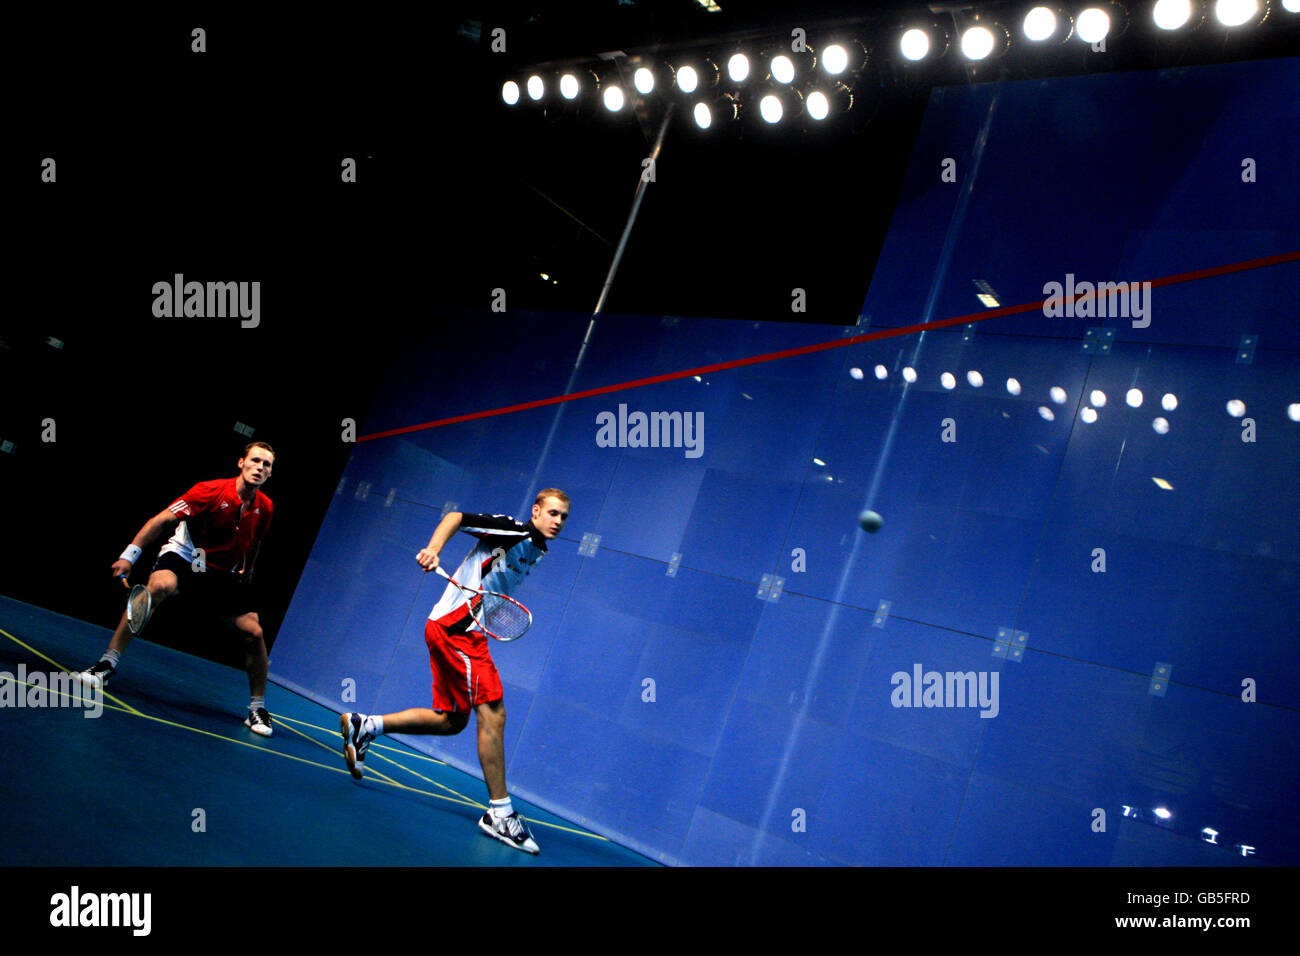 Squash - Hi-Tec World Squash Championships 2008 - National Squash Centre. France's Gregory Gaultier (red) in action against Switzerland's Nicolas Mueller Stock Photo